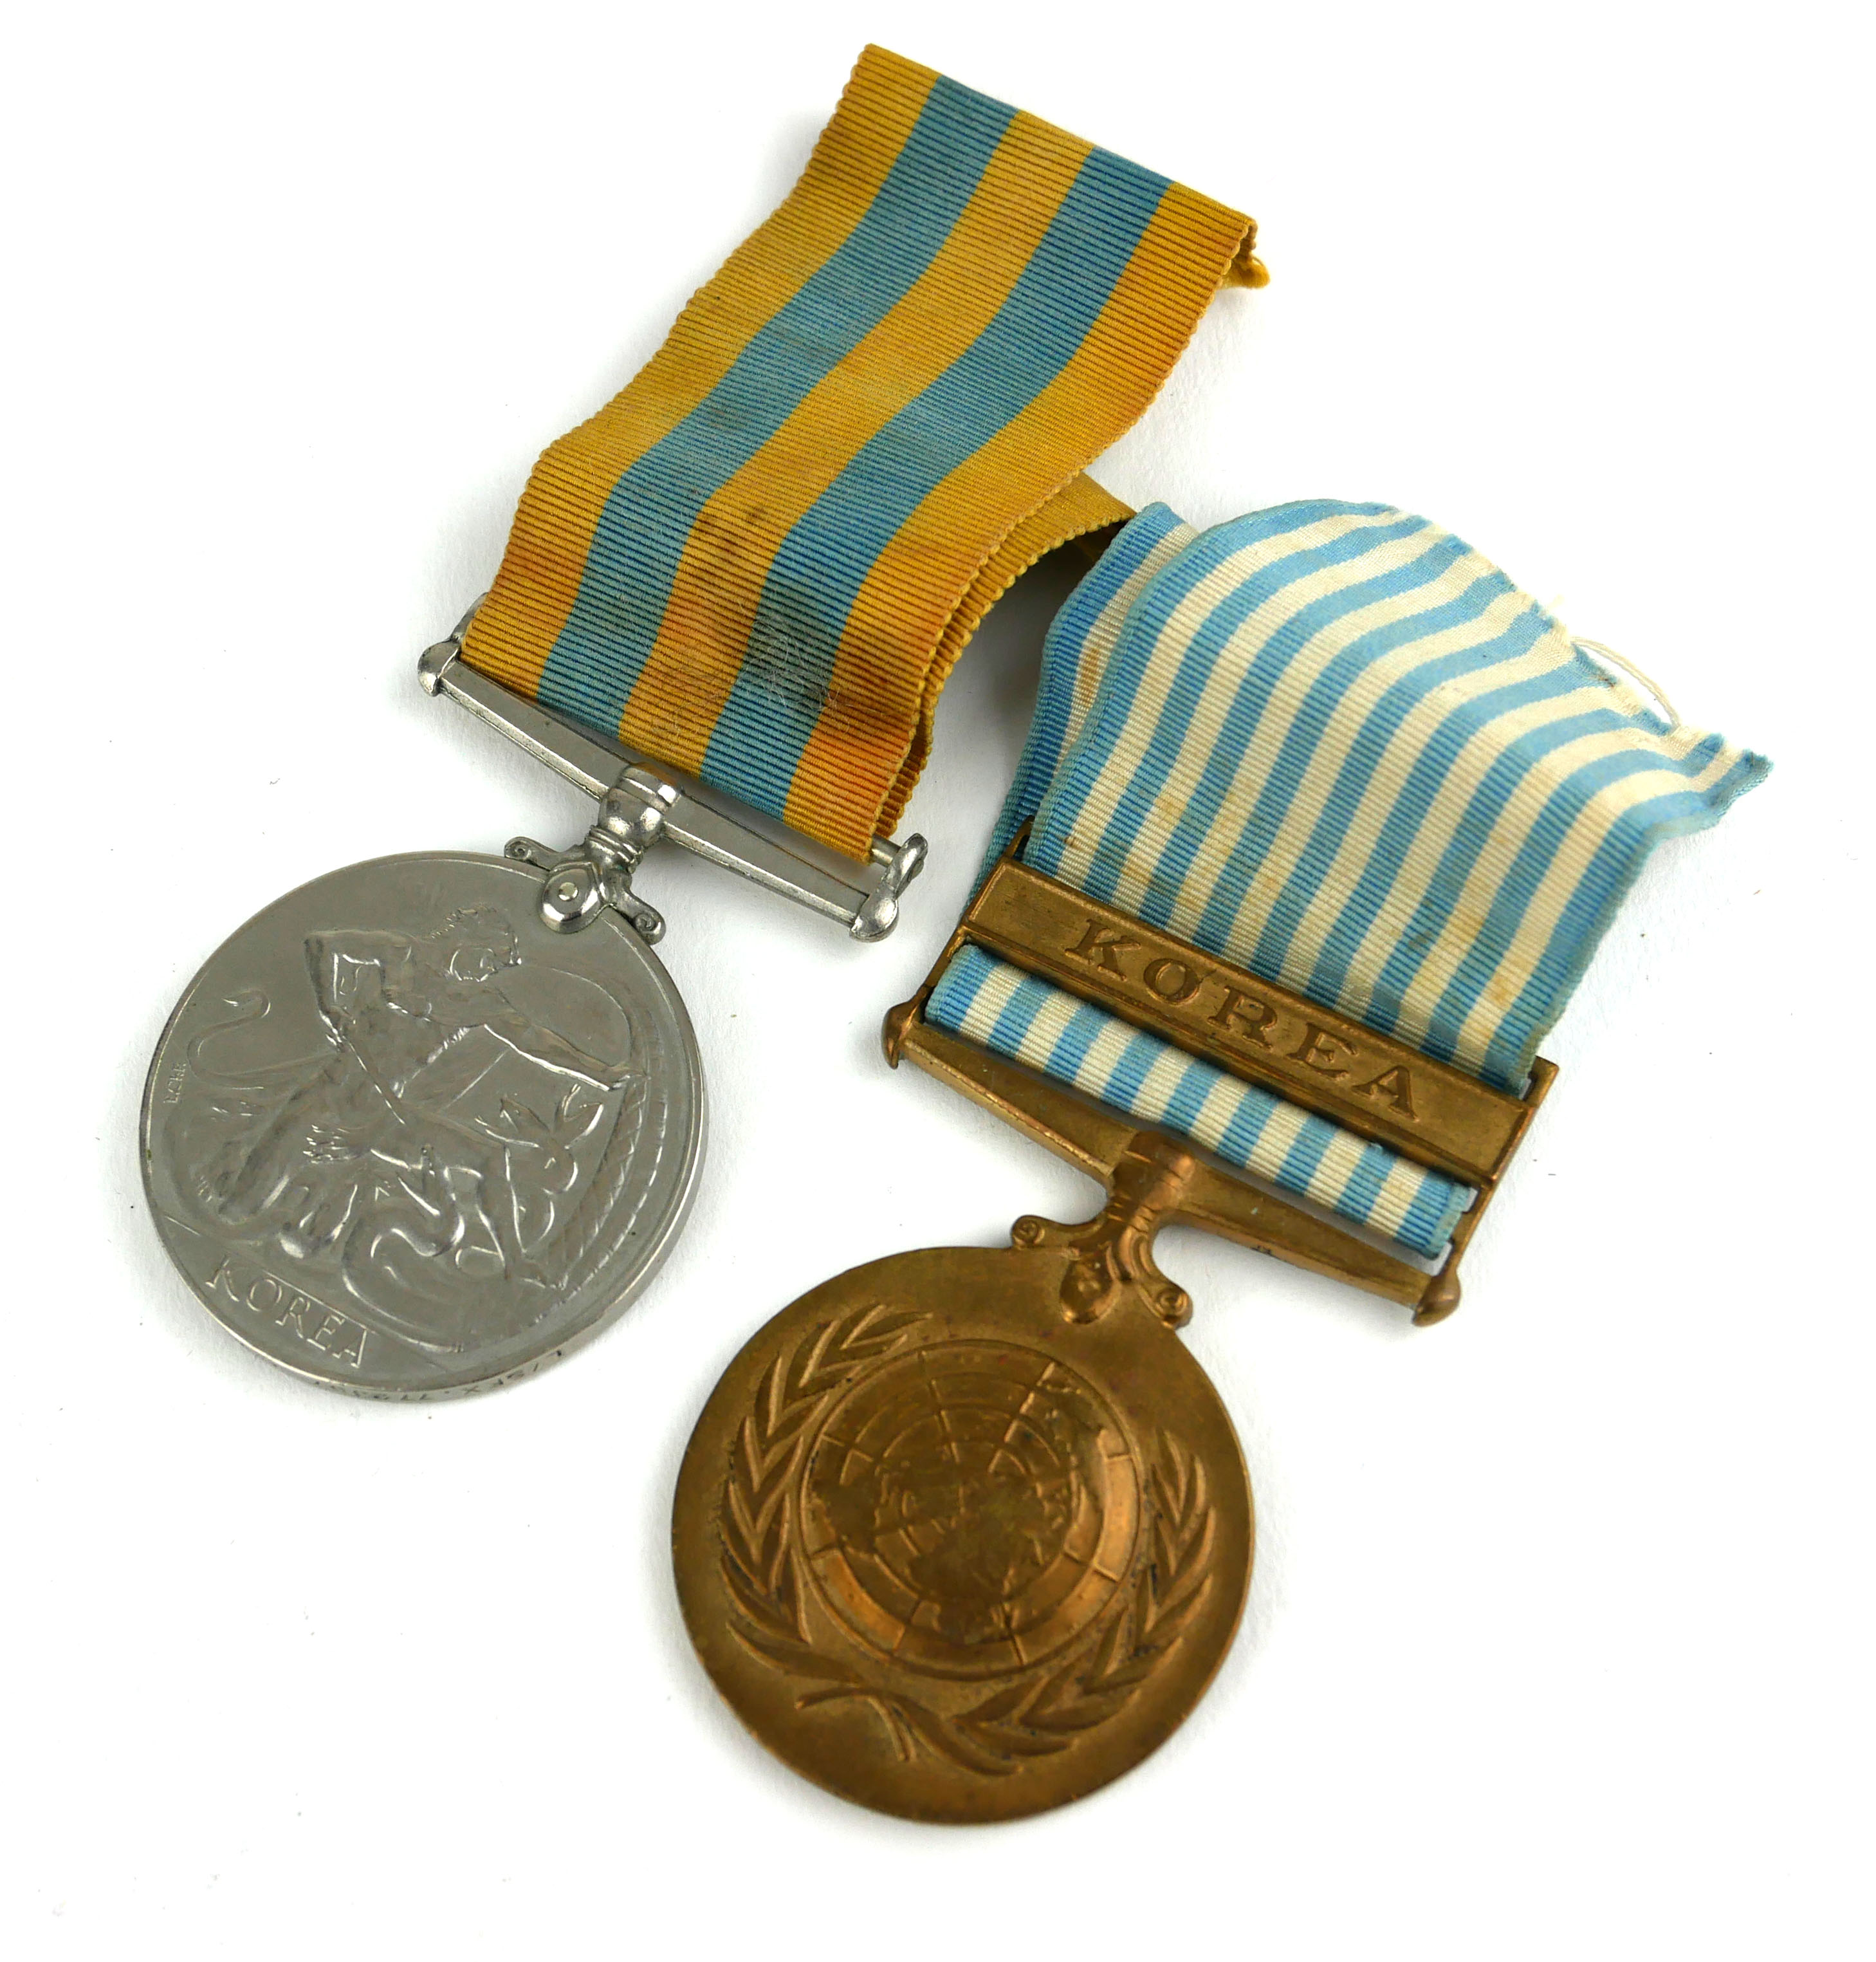 A QUEEN ELIZABETH KOREA CAMPAIGN MEDAL Awarded to 772357G W. Oxtoby LAMRN, together with a bronze